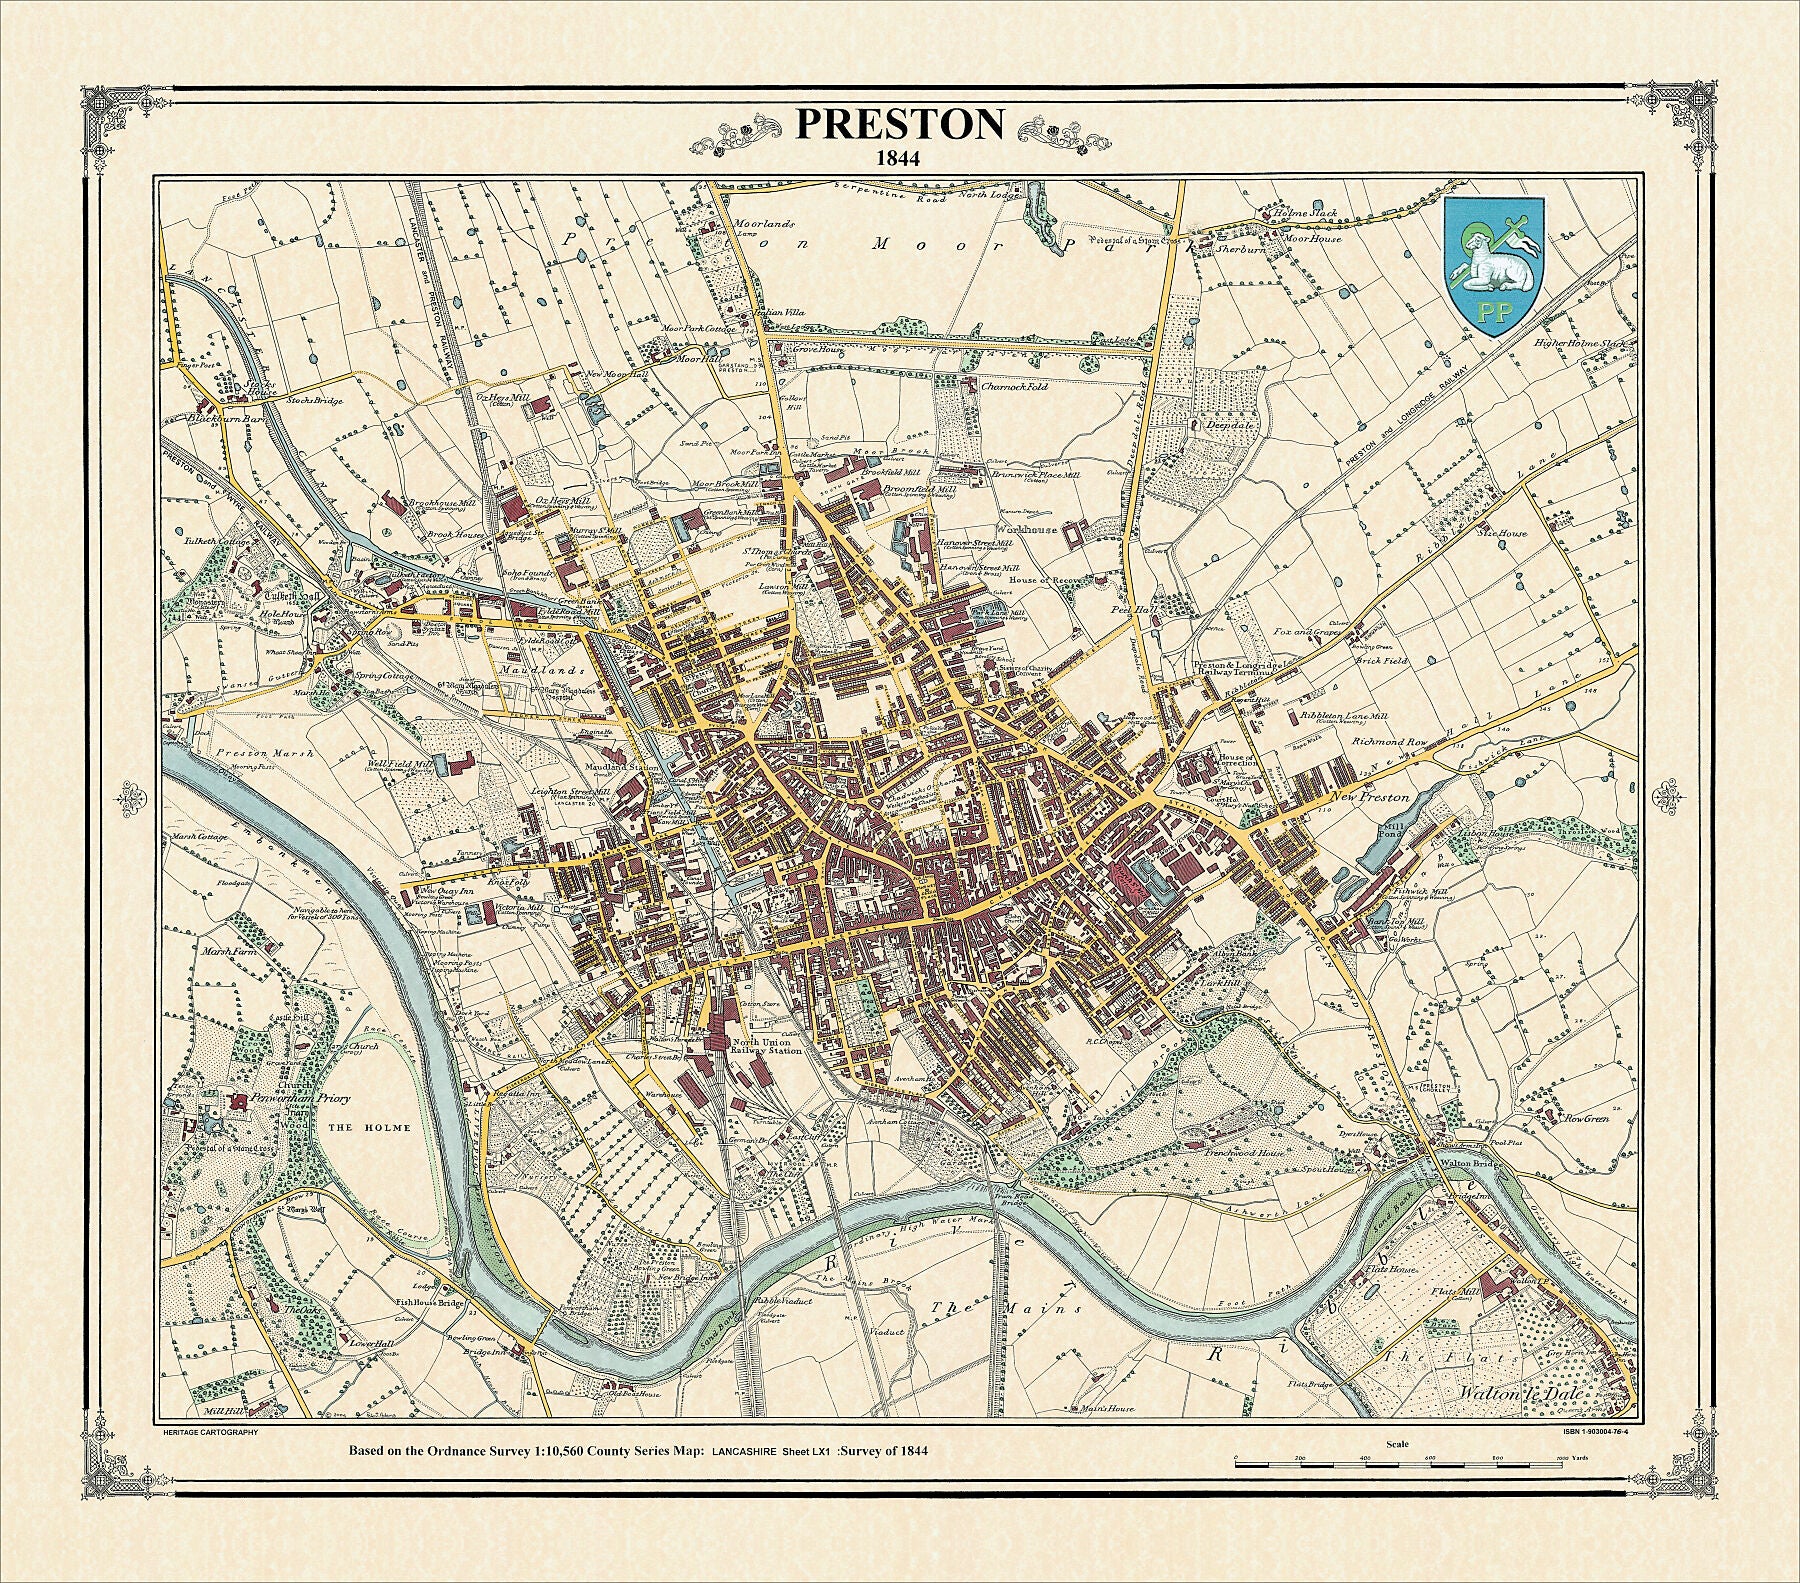 Coloured Victorian map of Preston in 1844 by Peter J Adams of Heritage Cartography